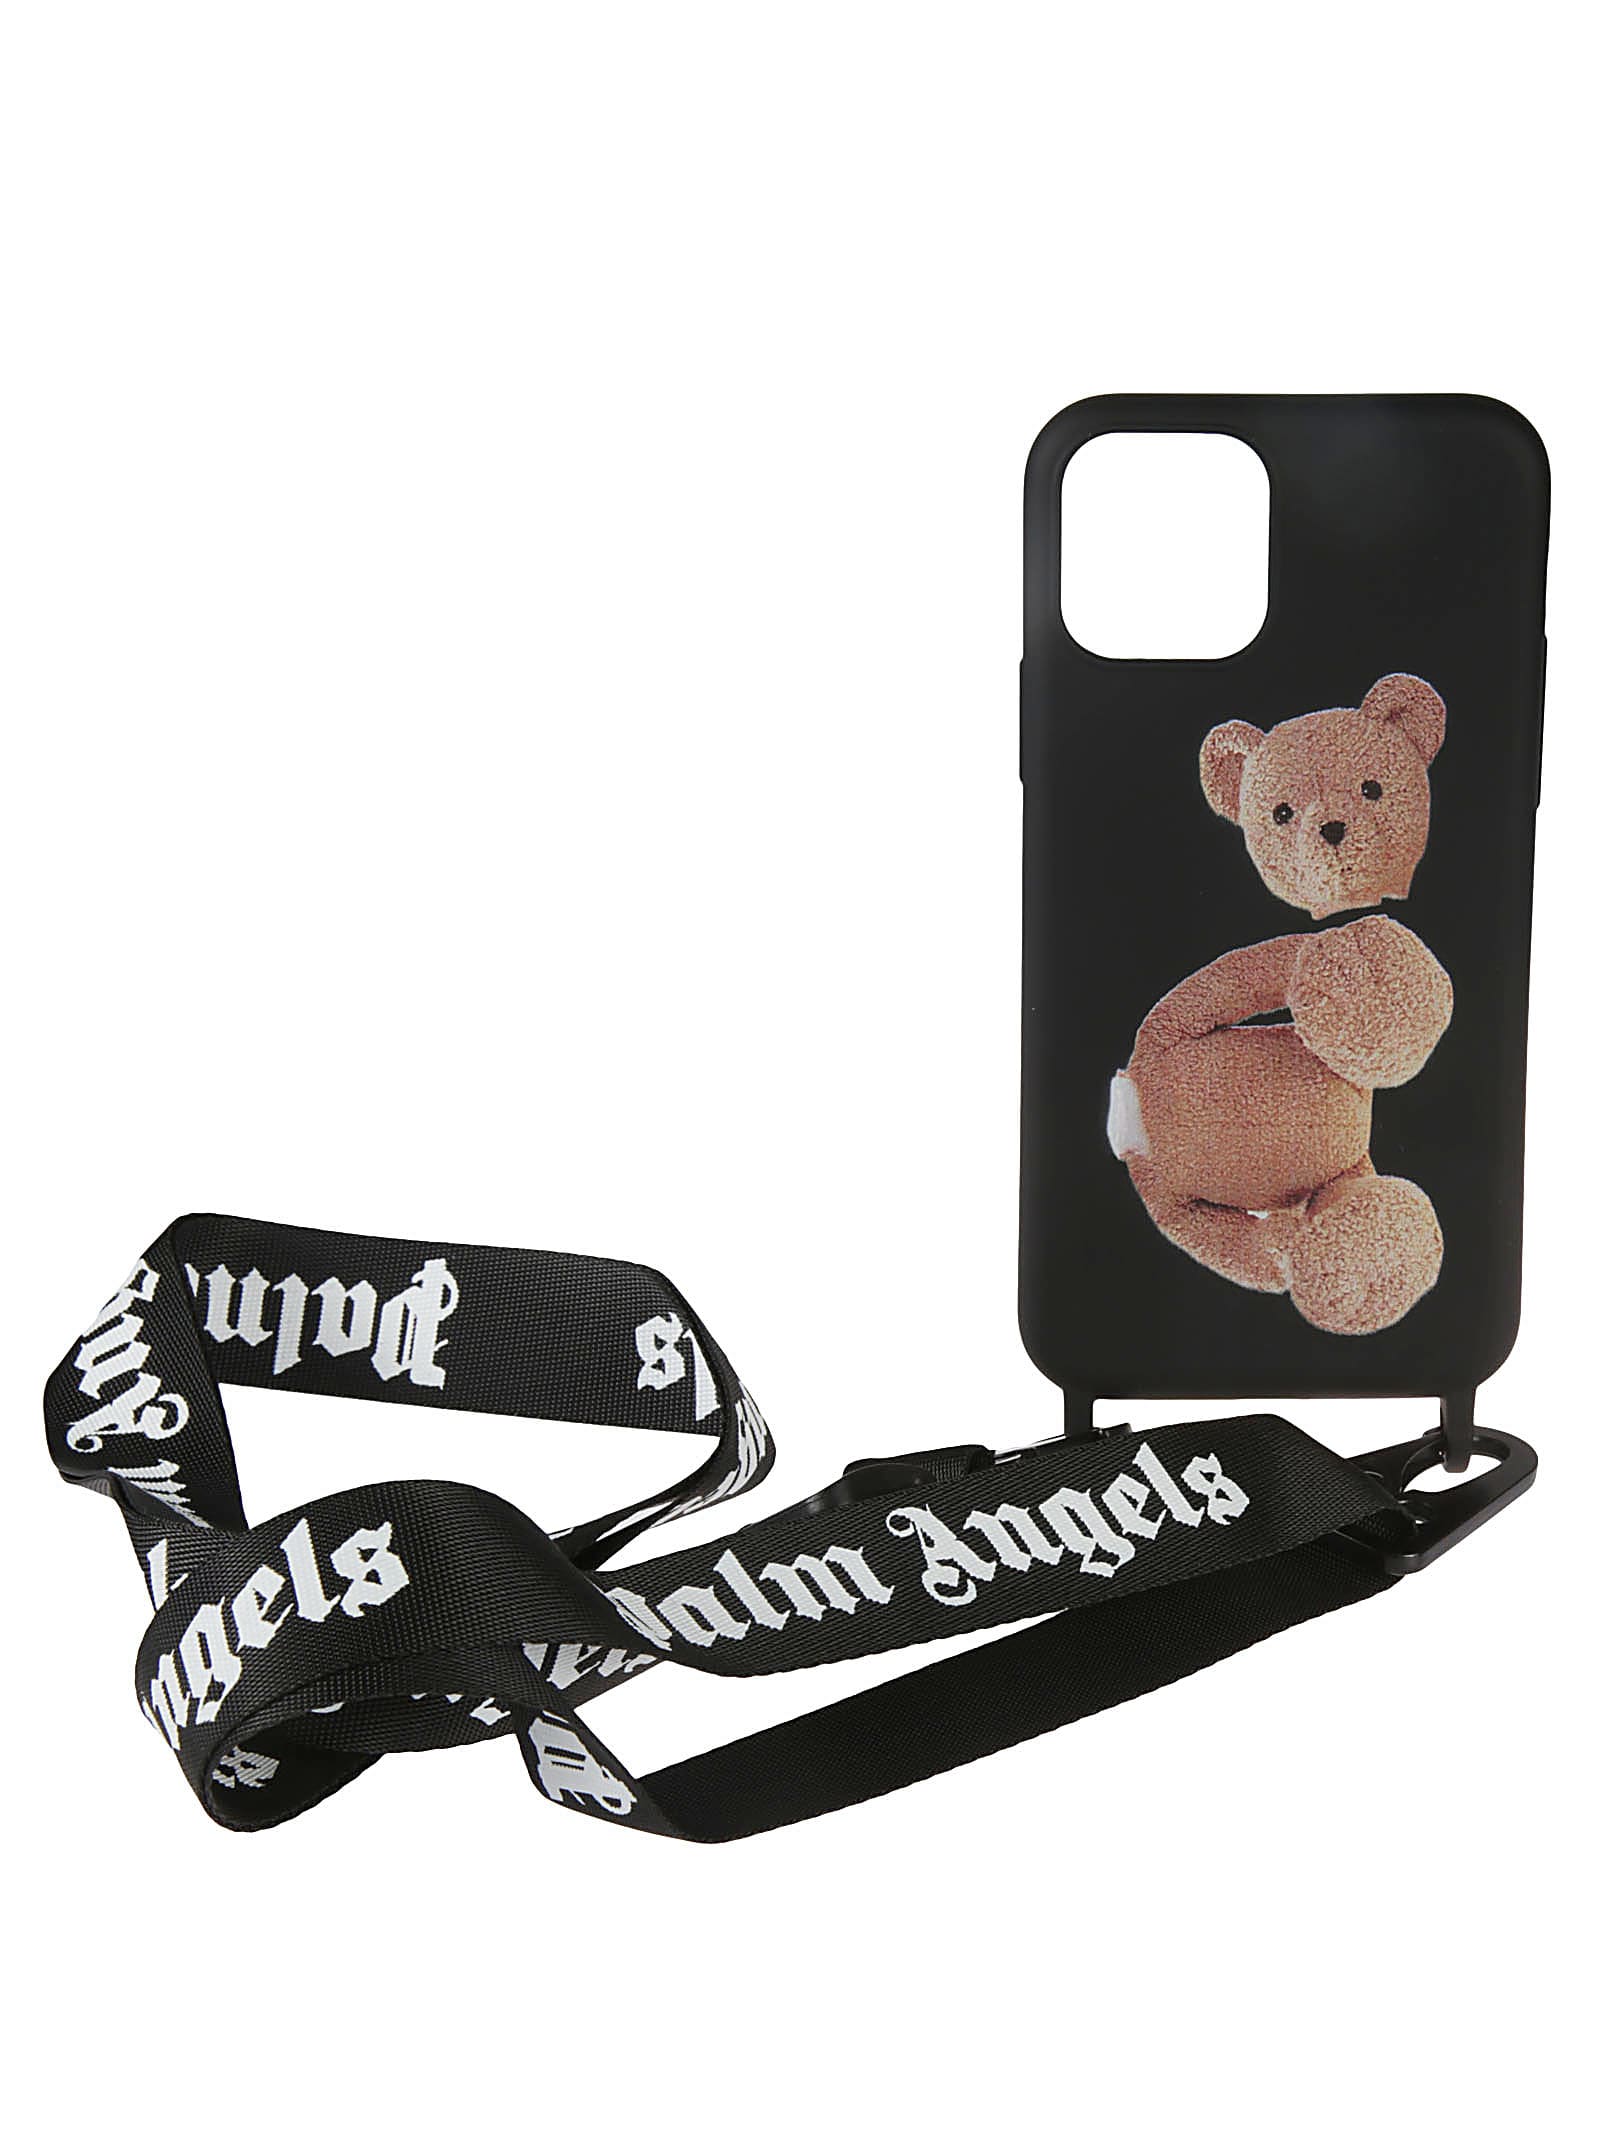 Palm Angels Neck Iphone Teddy Bear Case In Black/brown